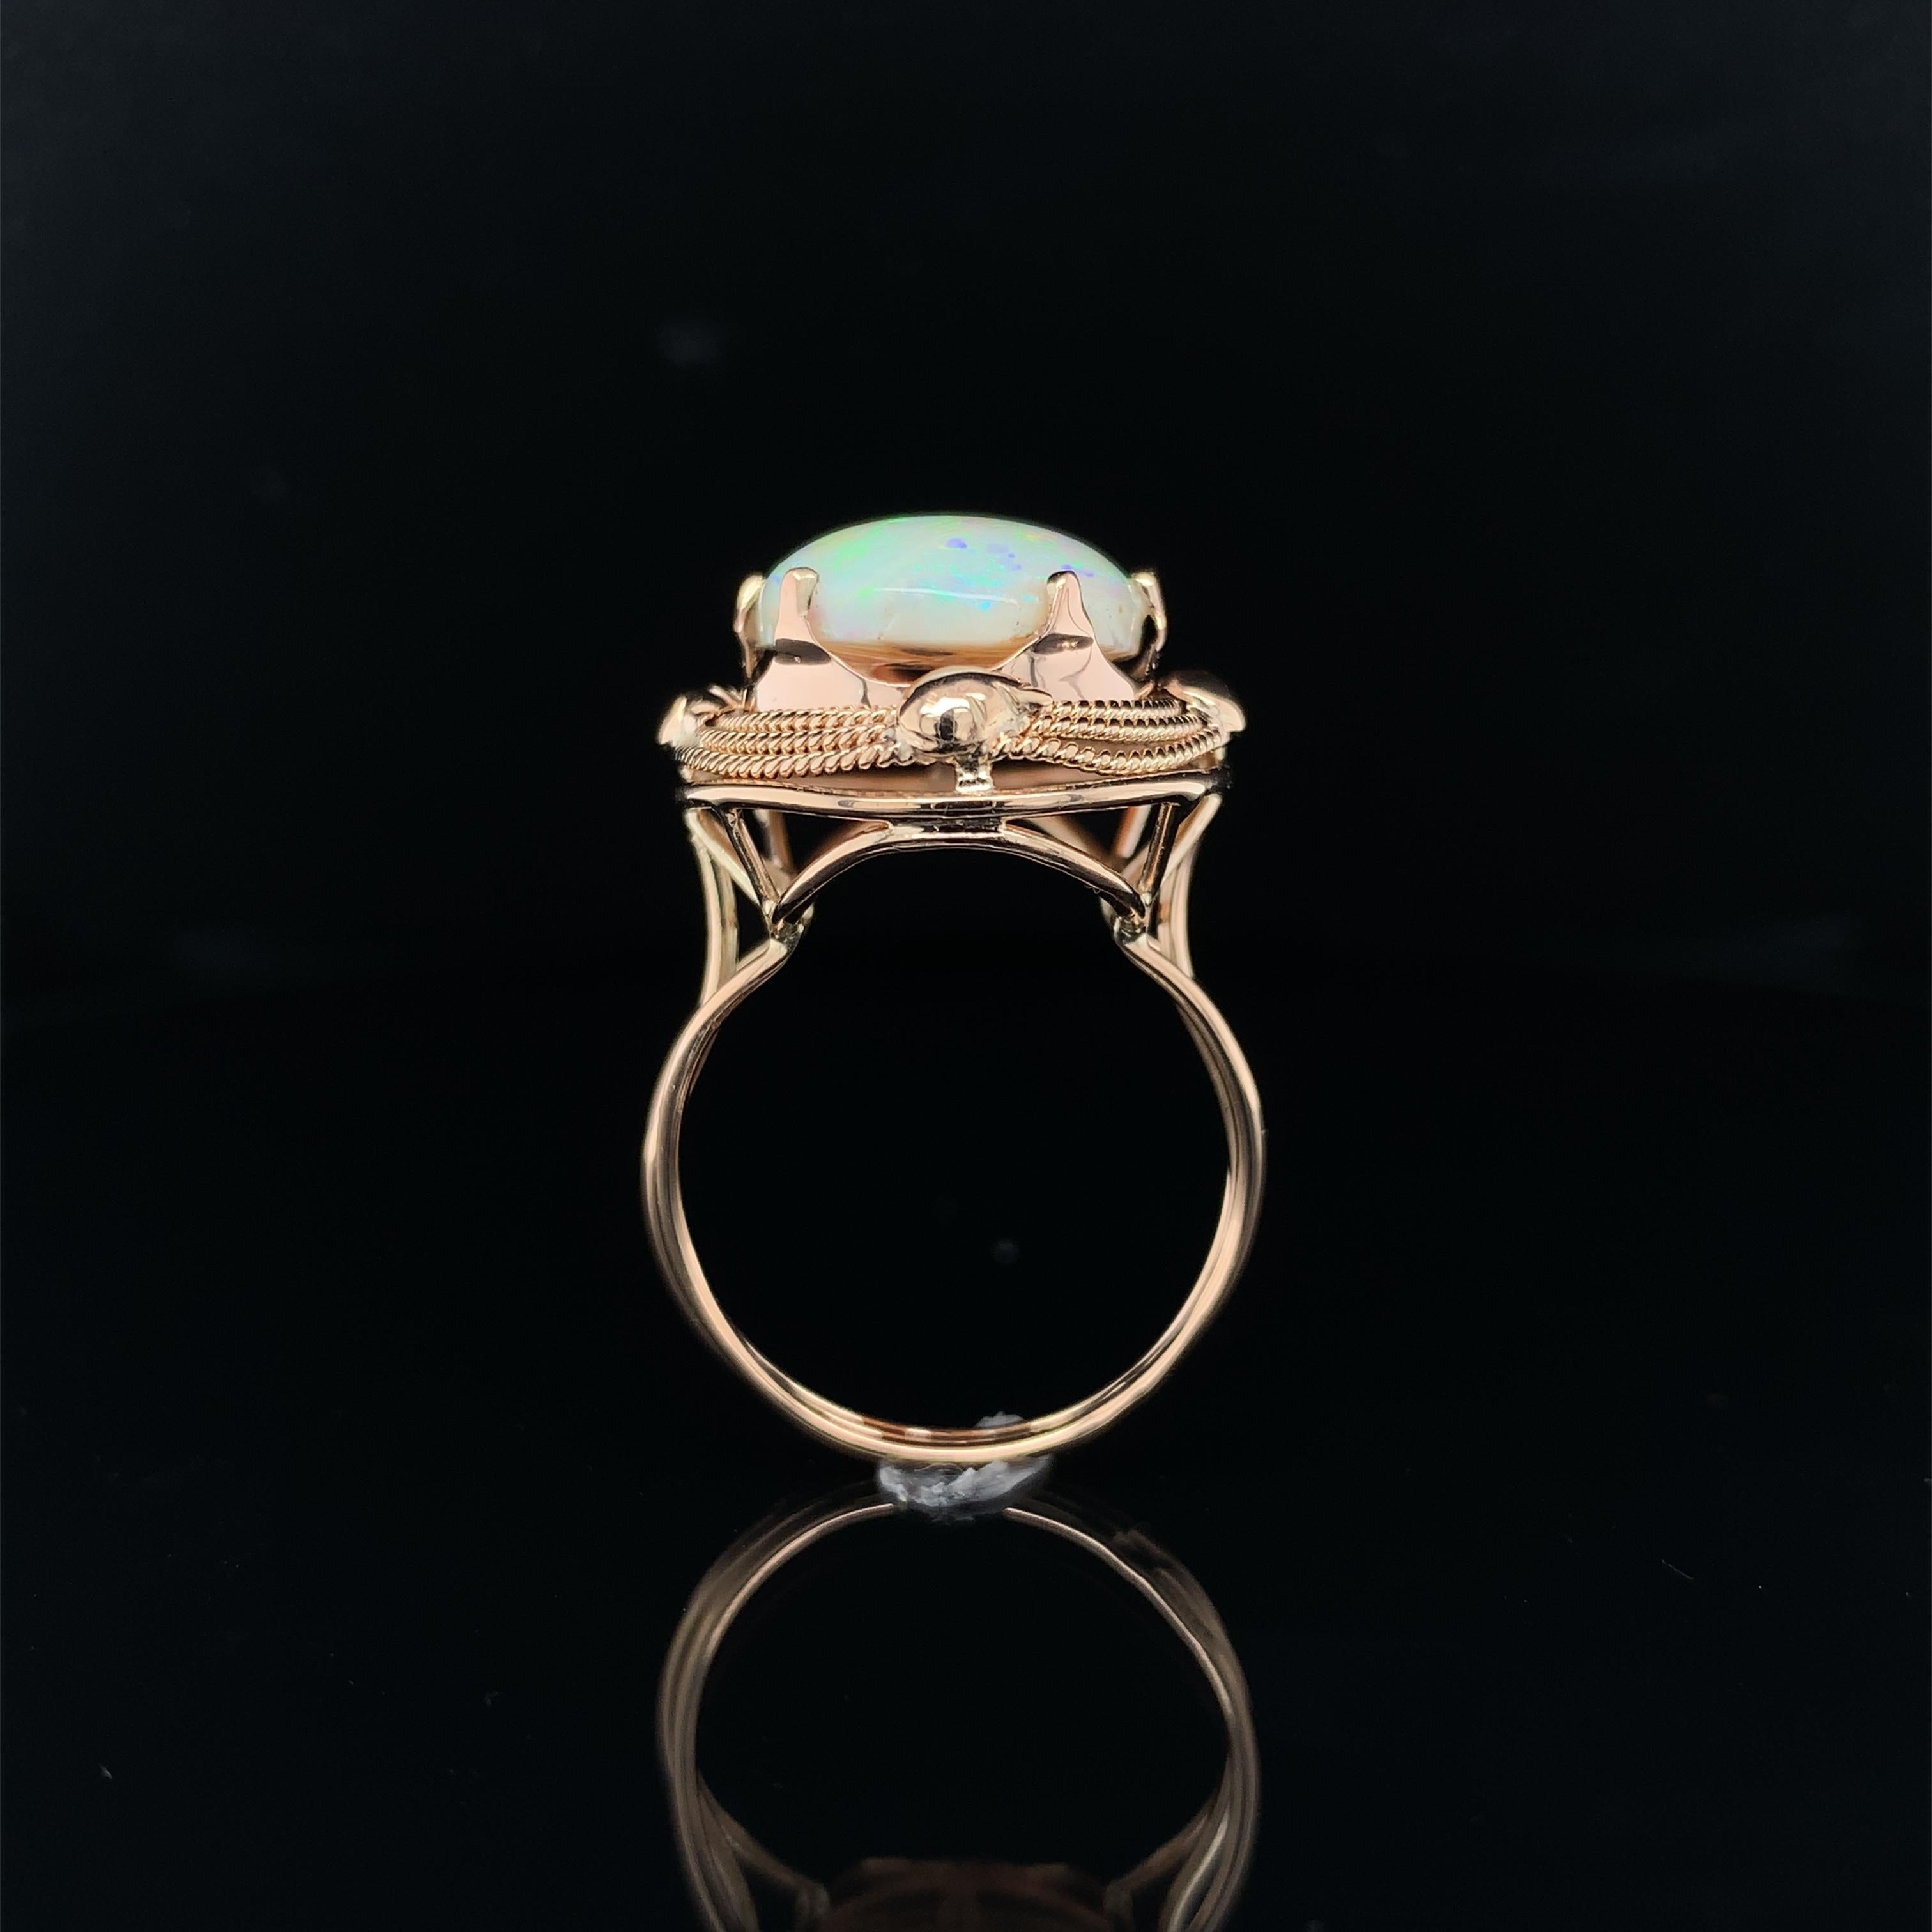 Vintage 14K rose gold 6.05 carat opal ring. The genuine natural Australian opal measures about 17mm x 12mm. The opal is freshly polished and has primarily pink and green play of color, with flashes of all colors. The ring is hand wrought hand made